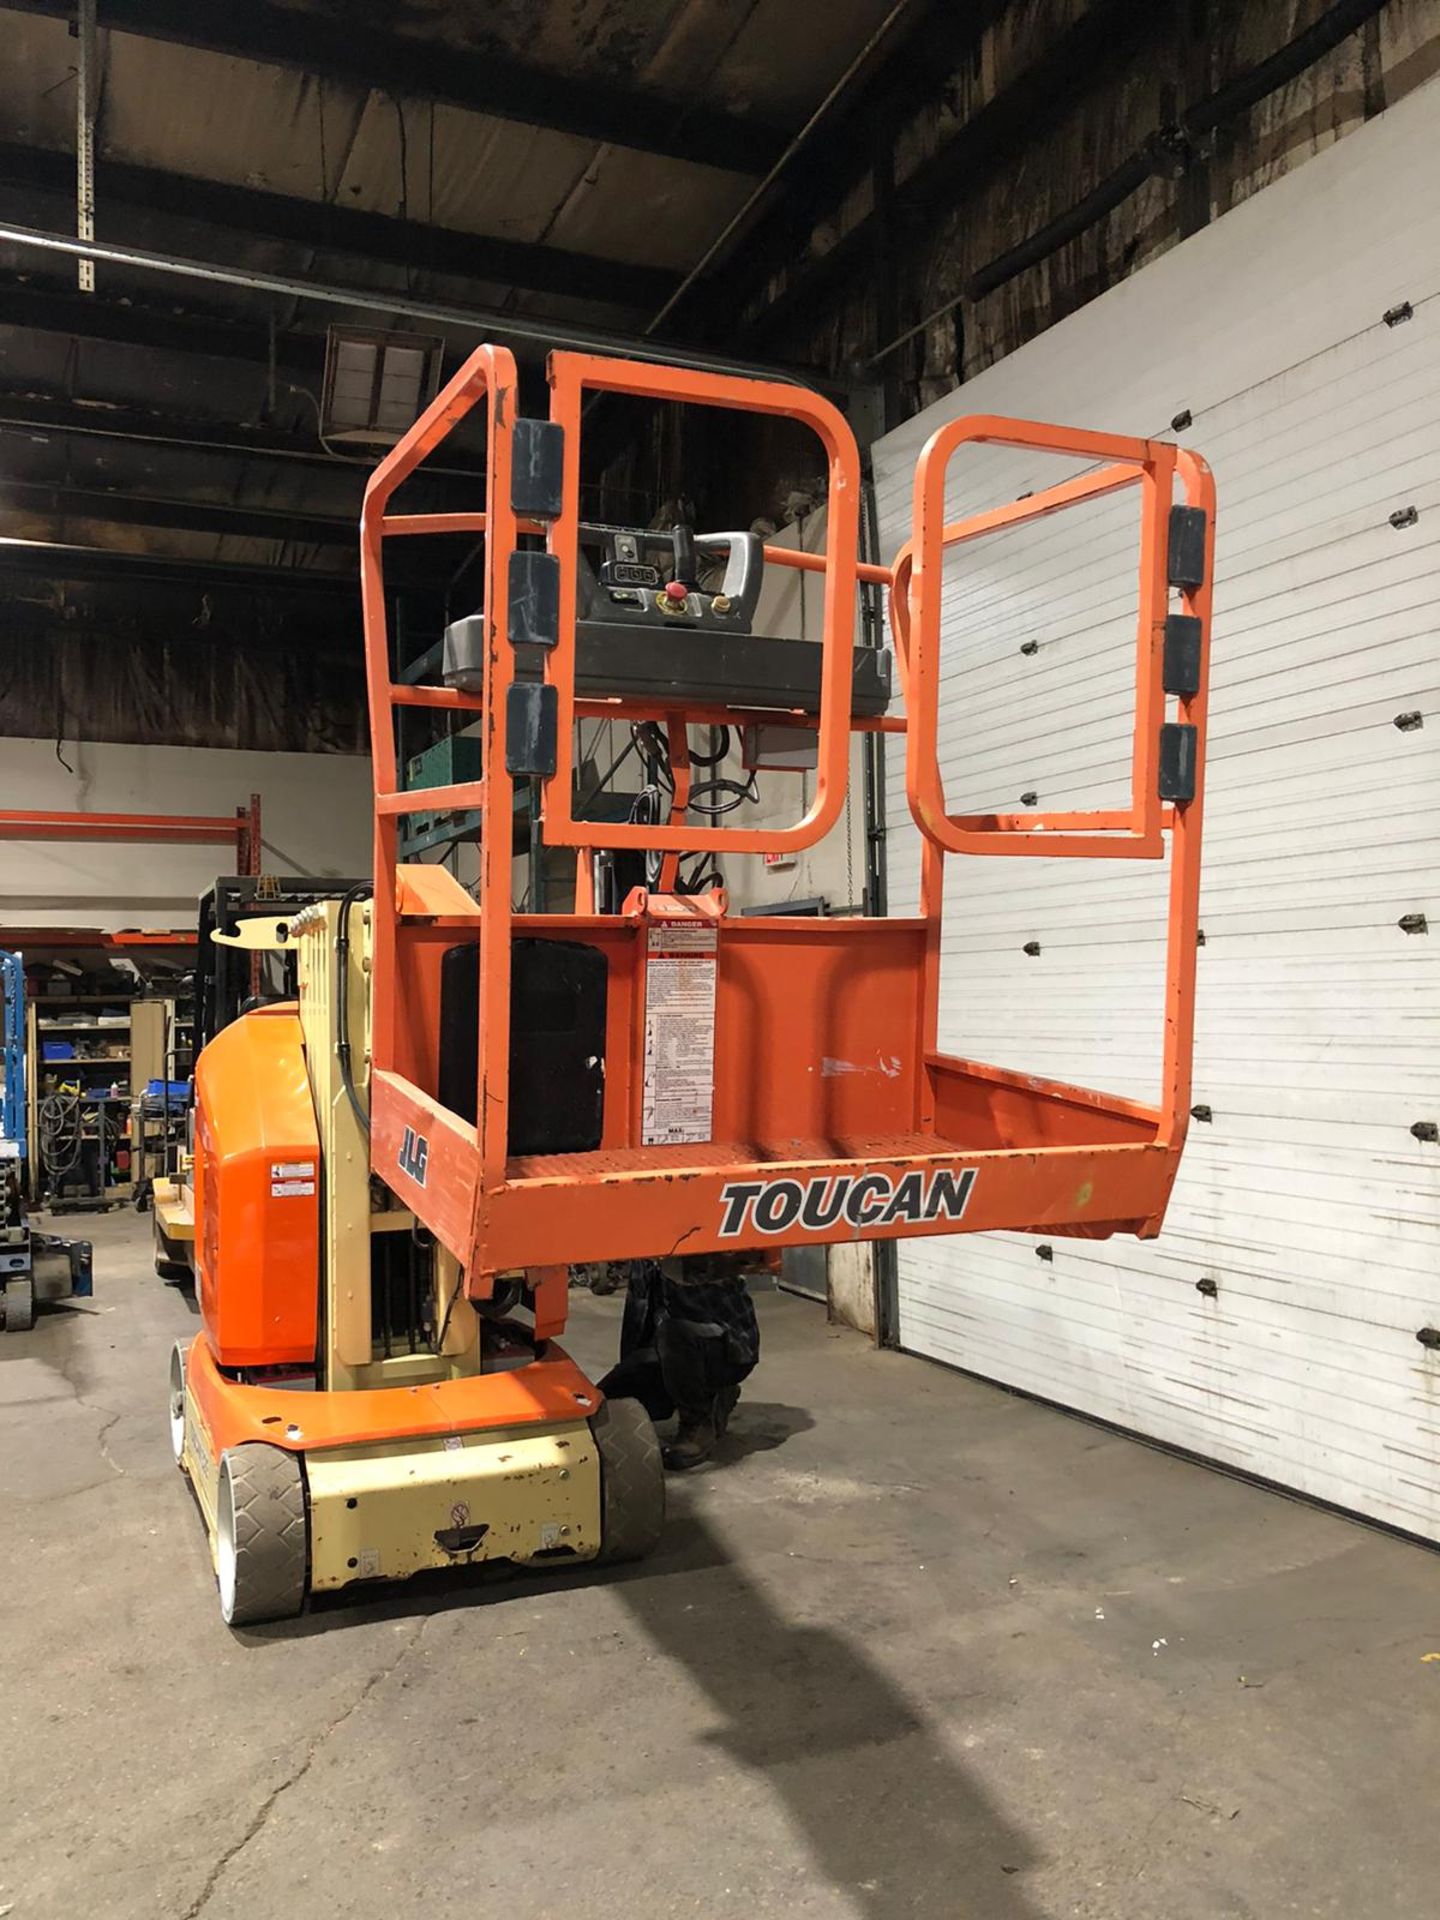 2014 JLG 32E Toucan Mast Boom Lift - Electric 48V with Low Hours with 32' Platform Height and 500lbs - Image 2 of 7